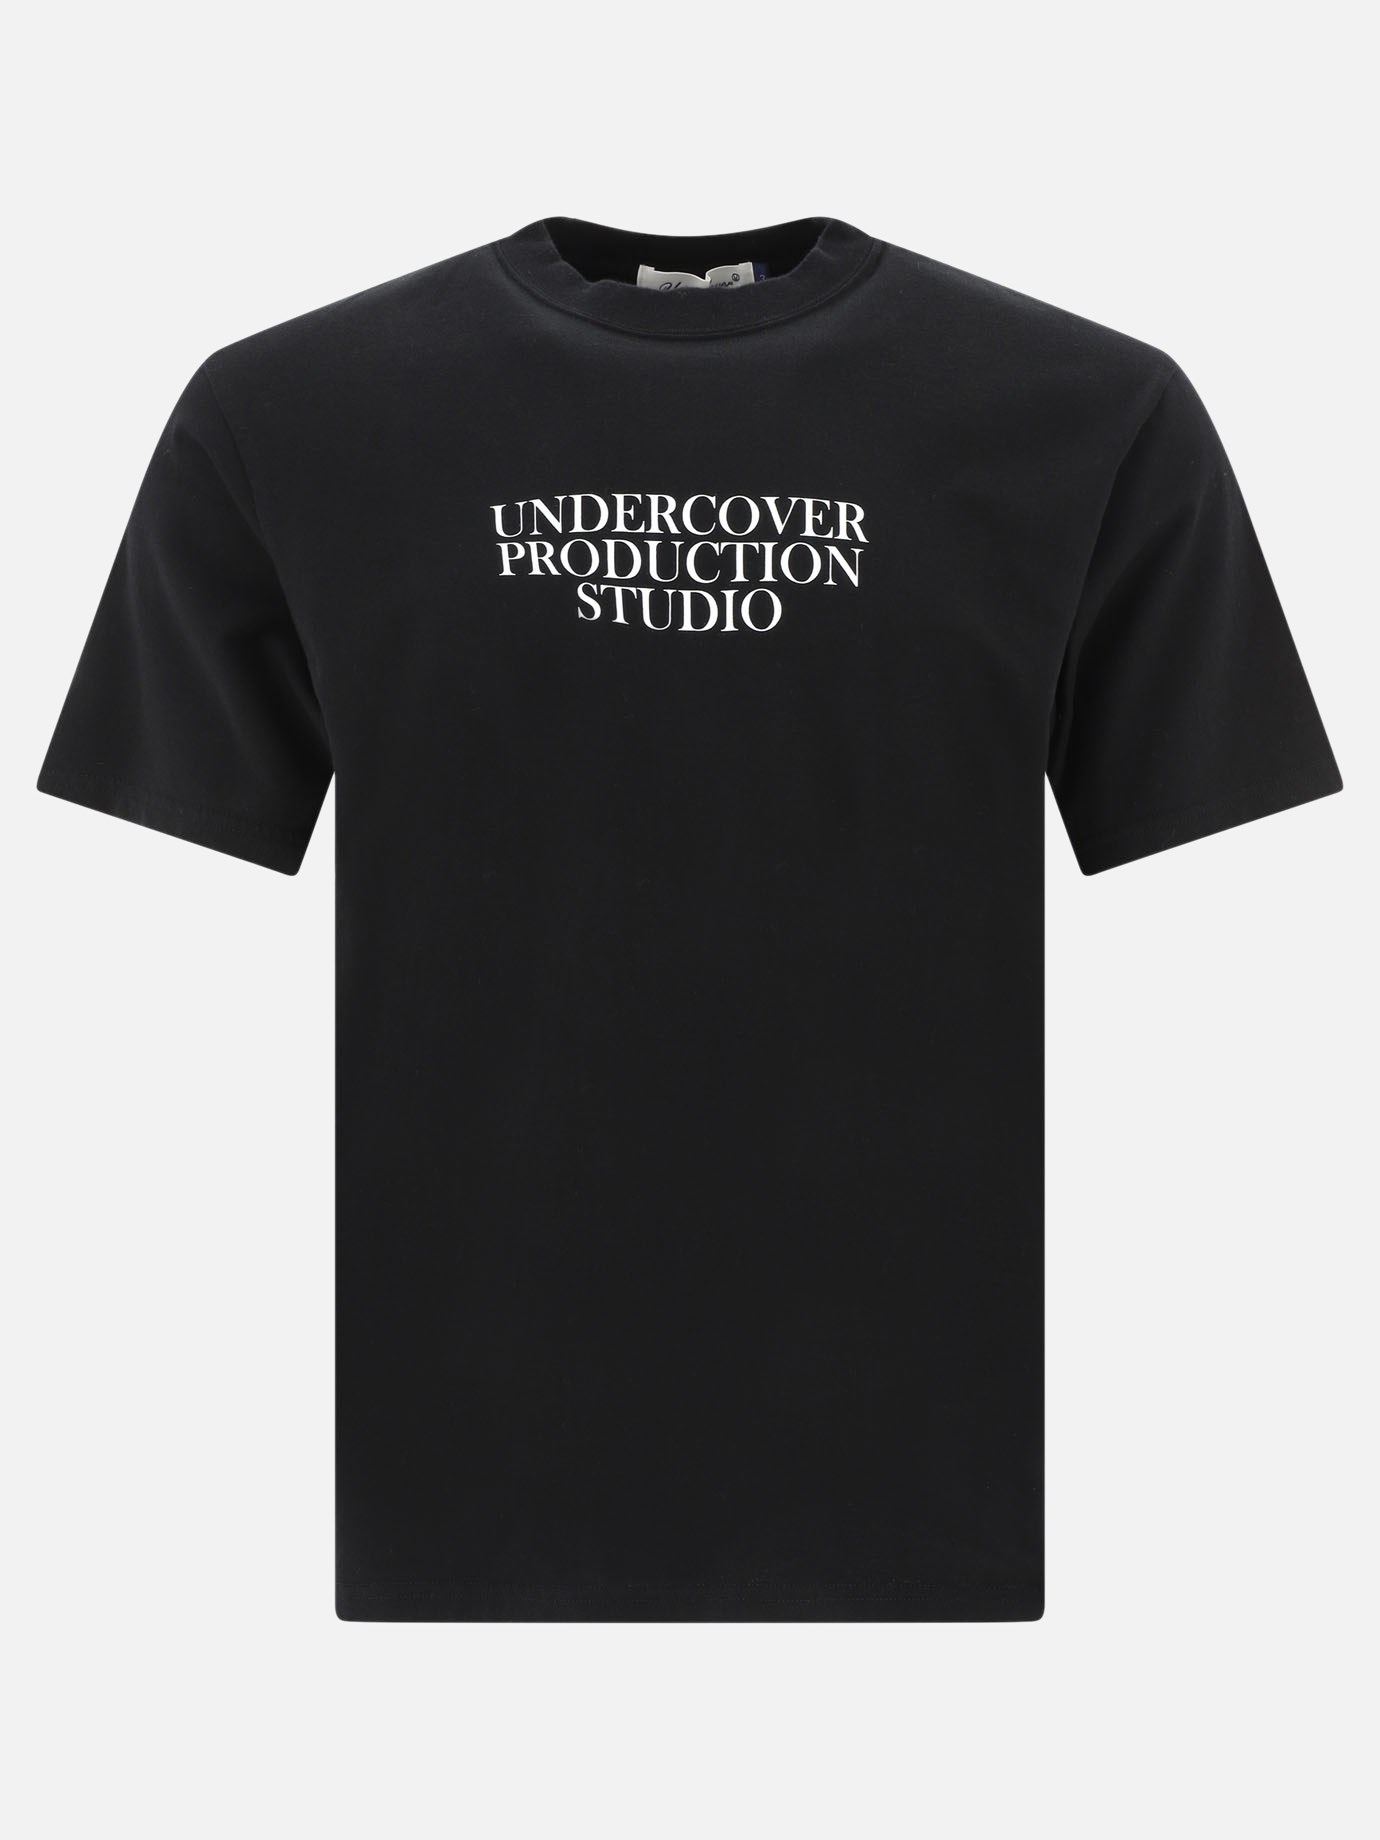  Production Studio  t-shirtby Undercover - 5